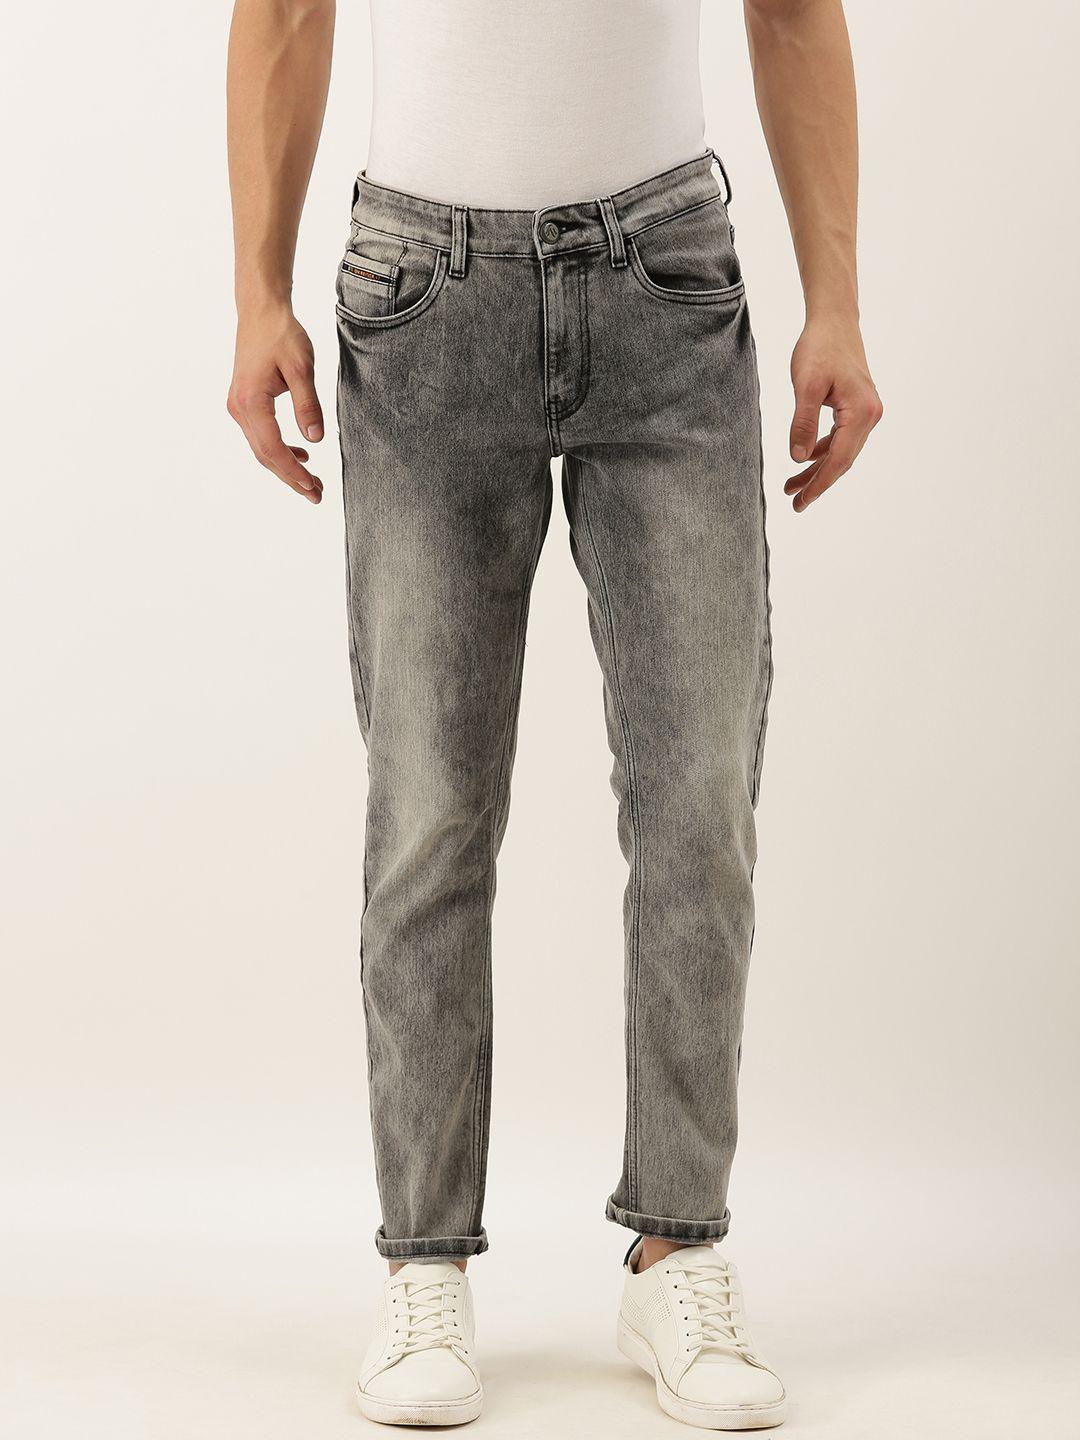 the-indian-garage-co-men-grey-slim-fit-mid-rise-clean-look-jeans